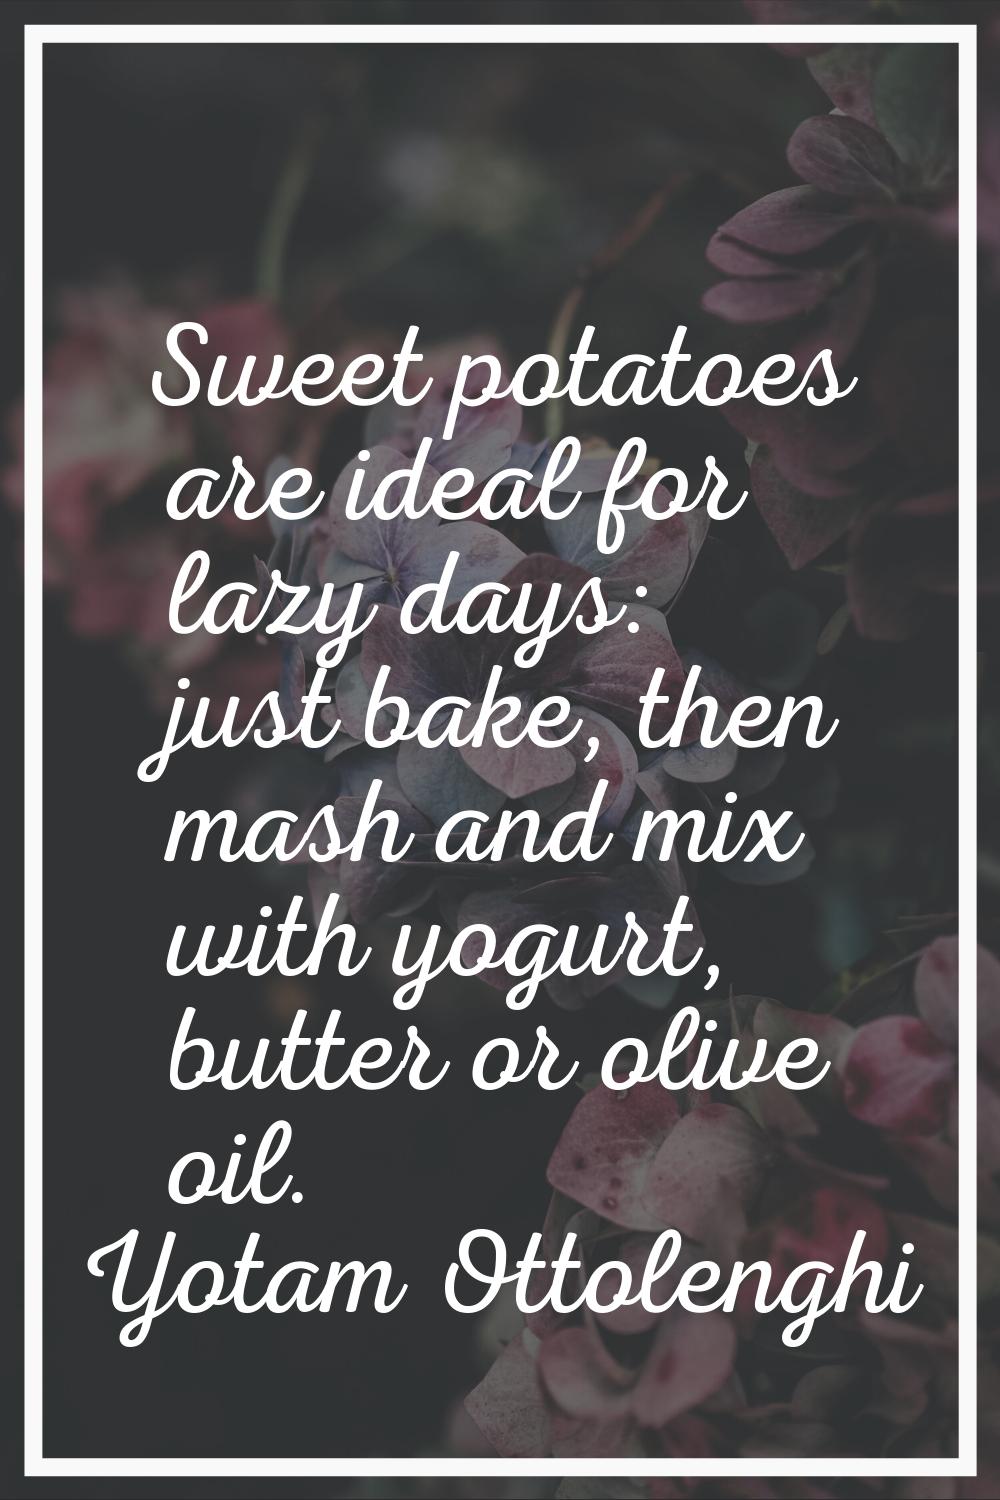 Sweet potatoes are ideal for lazy days: just bake, then mash and mix with yogurt, butter or olive o